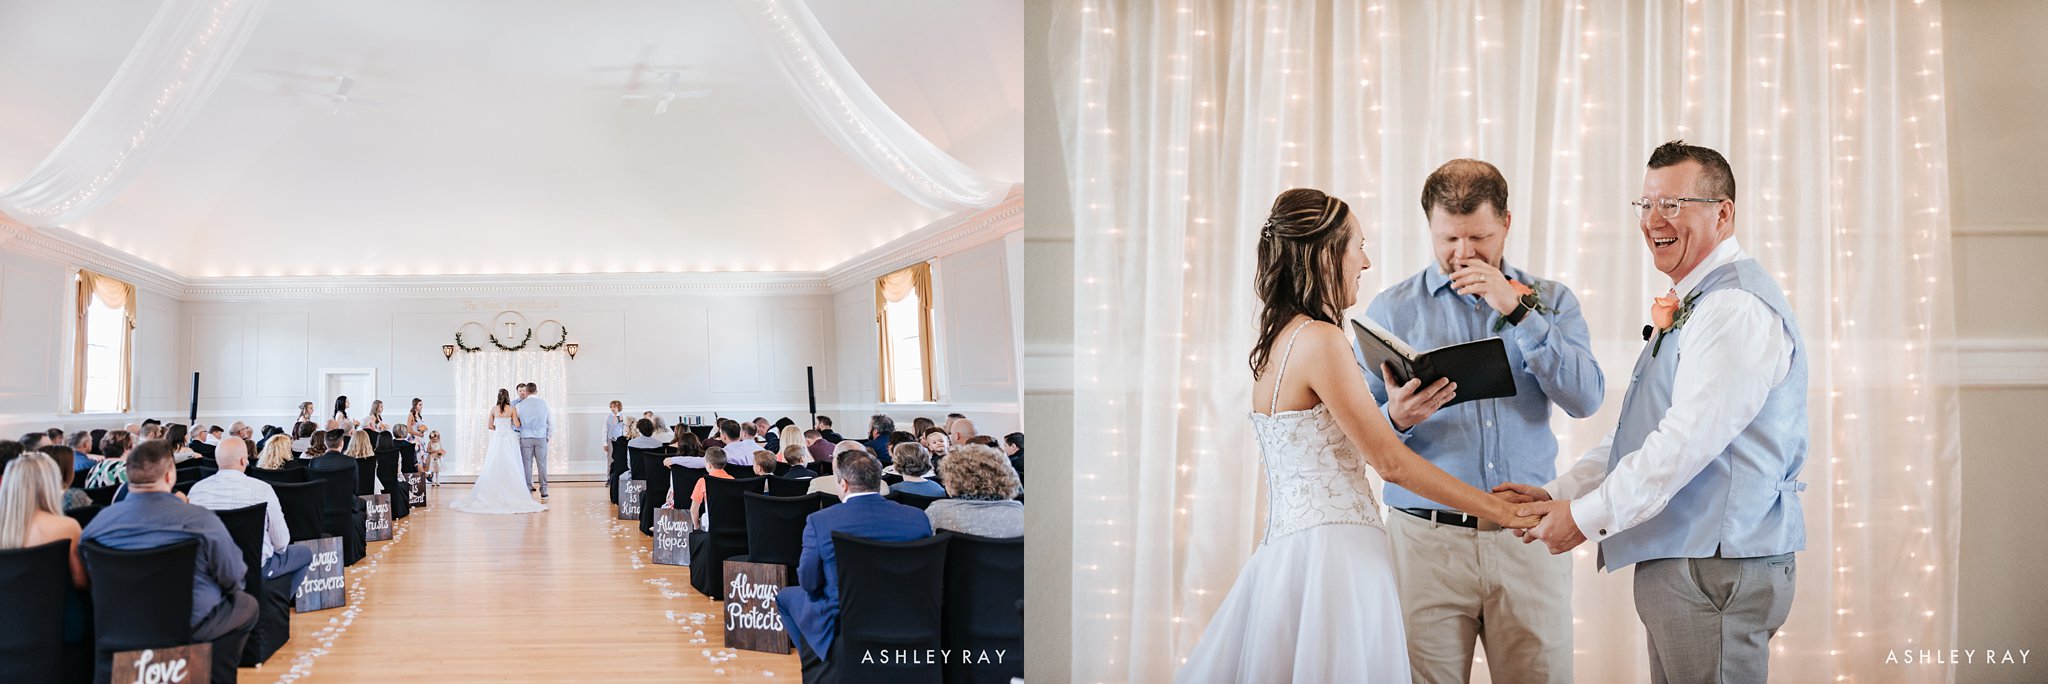 Sunny Spring Summer Wedding at The Venue at Anthony's in Downtown Wapakoneta, Ohio